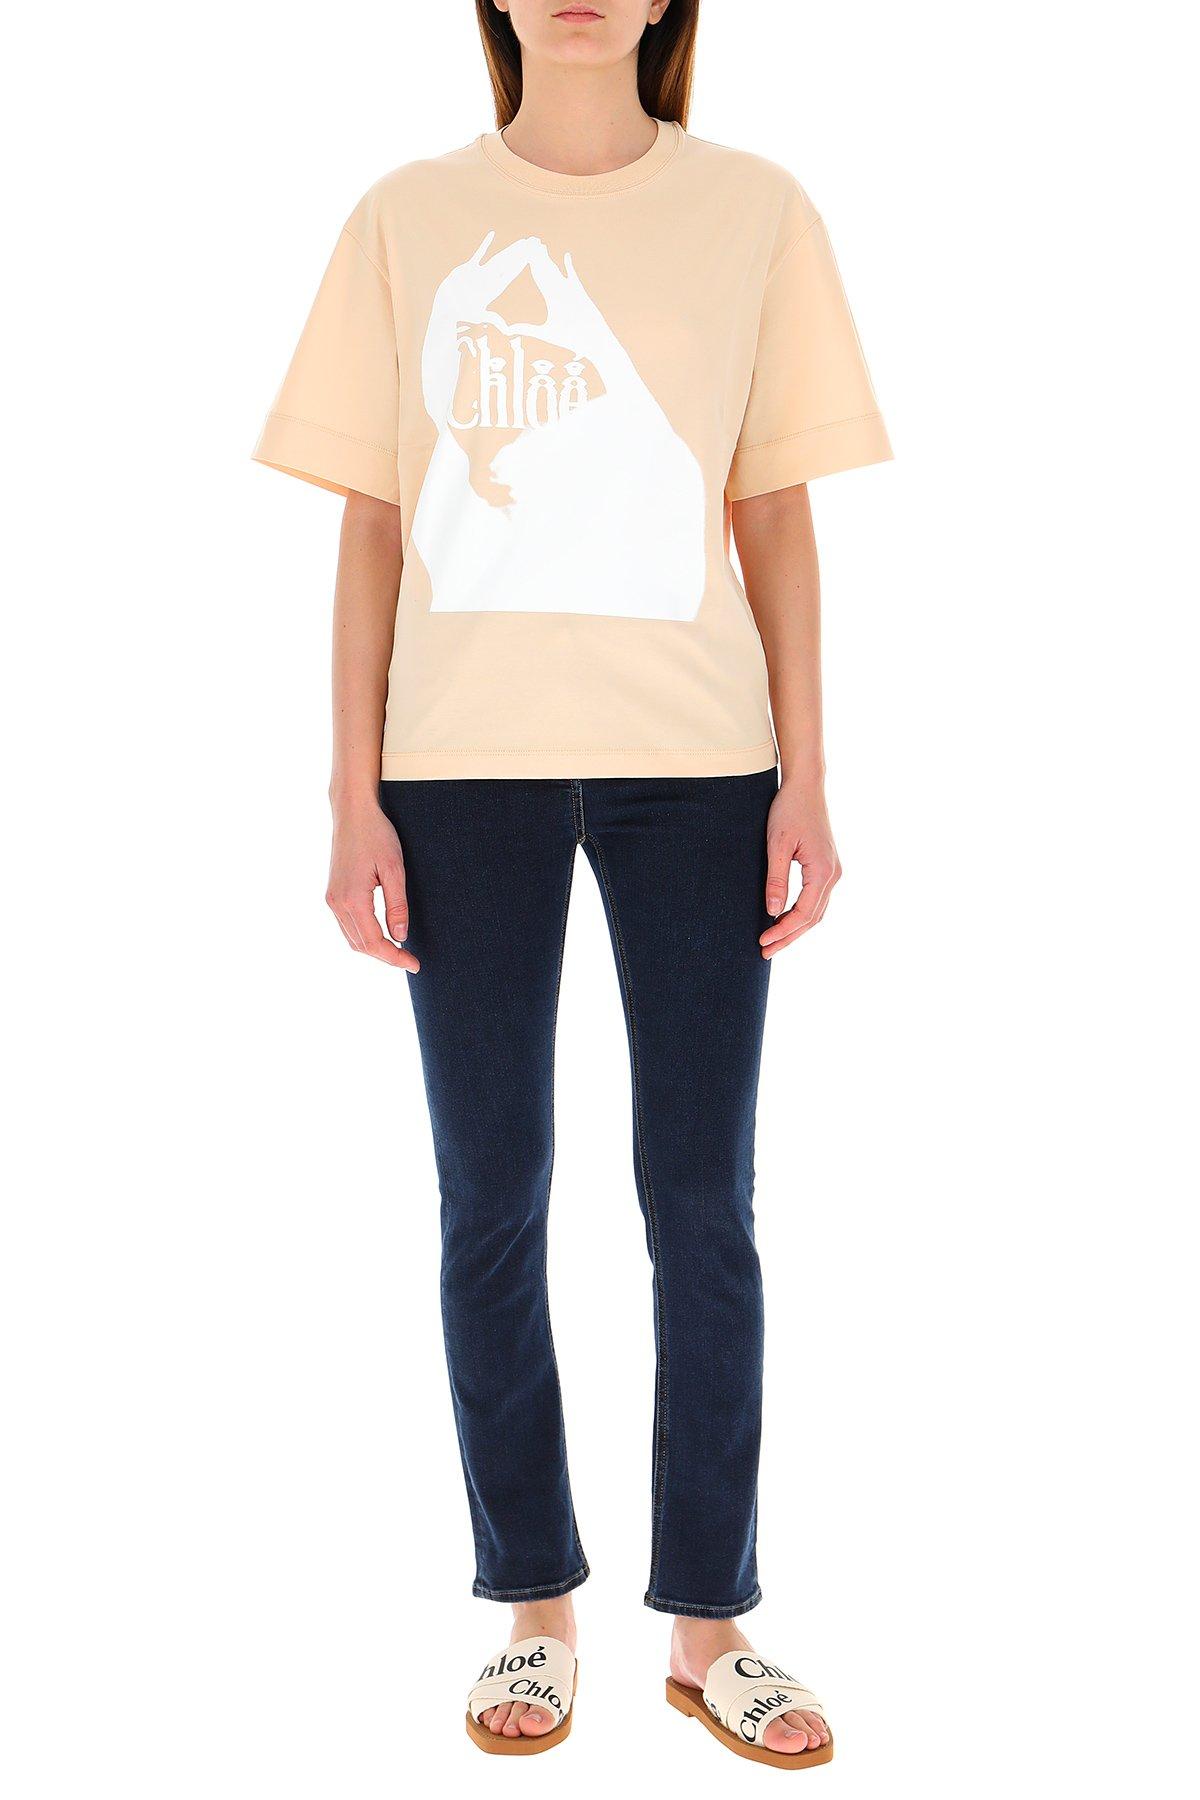 Chloé Cotton T-shirt in Pink - Save 32% - Lyst